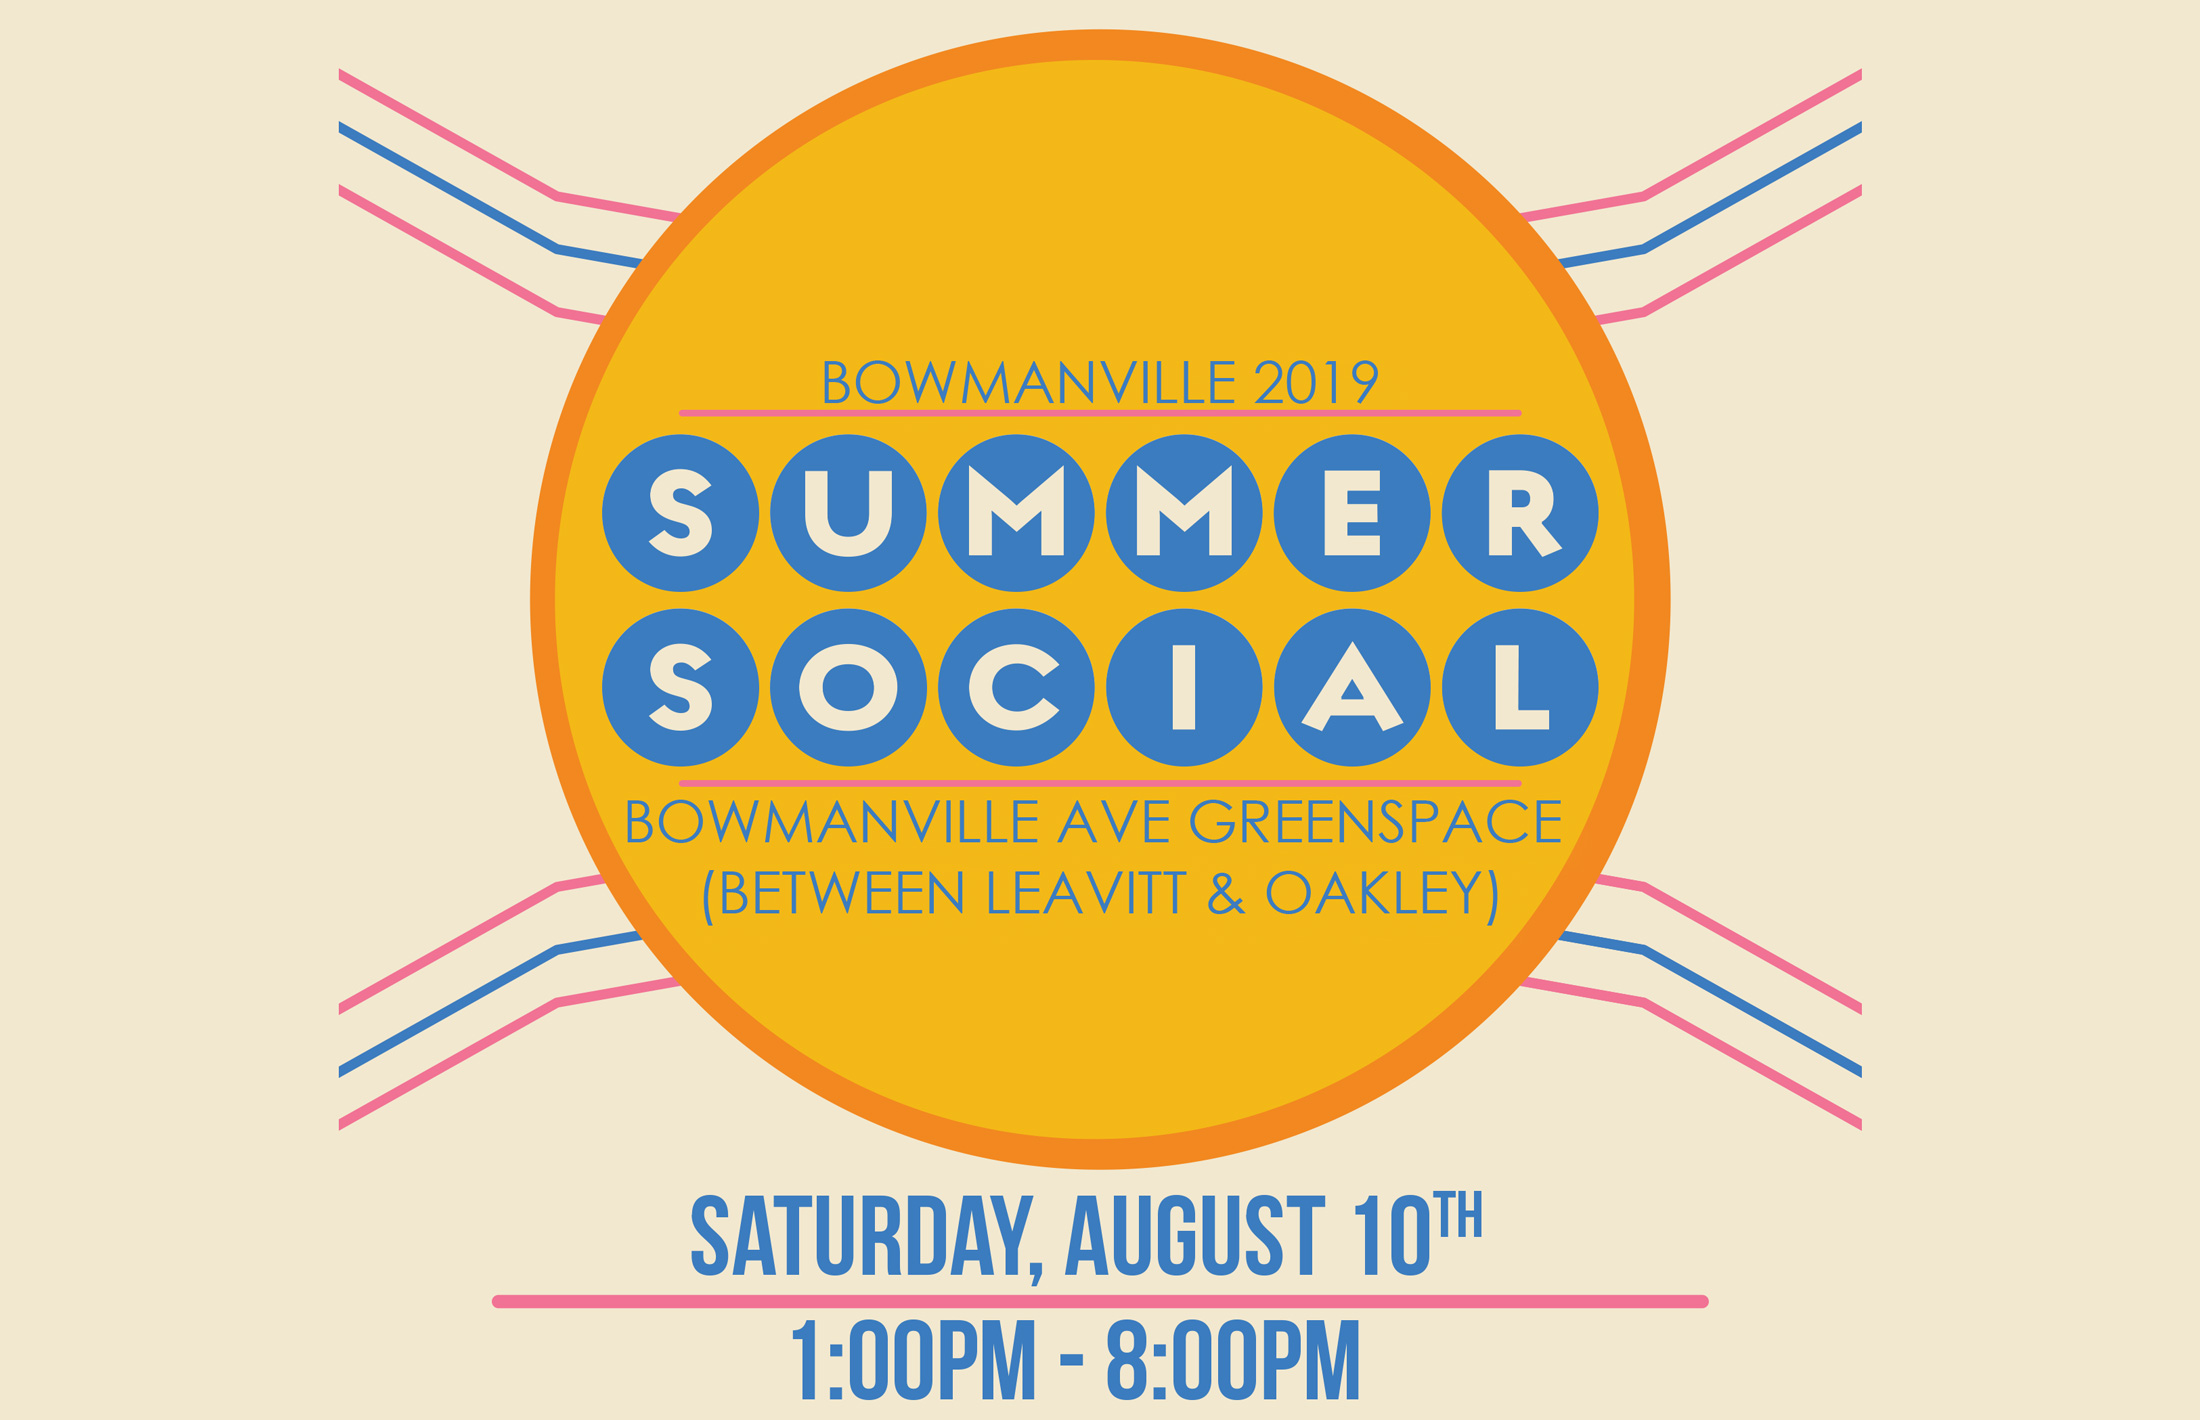 Bowmanville Summer Social 2019 - logo with date - Saturday August 10th 2019